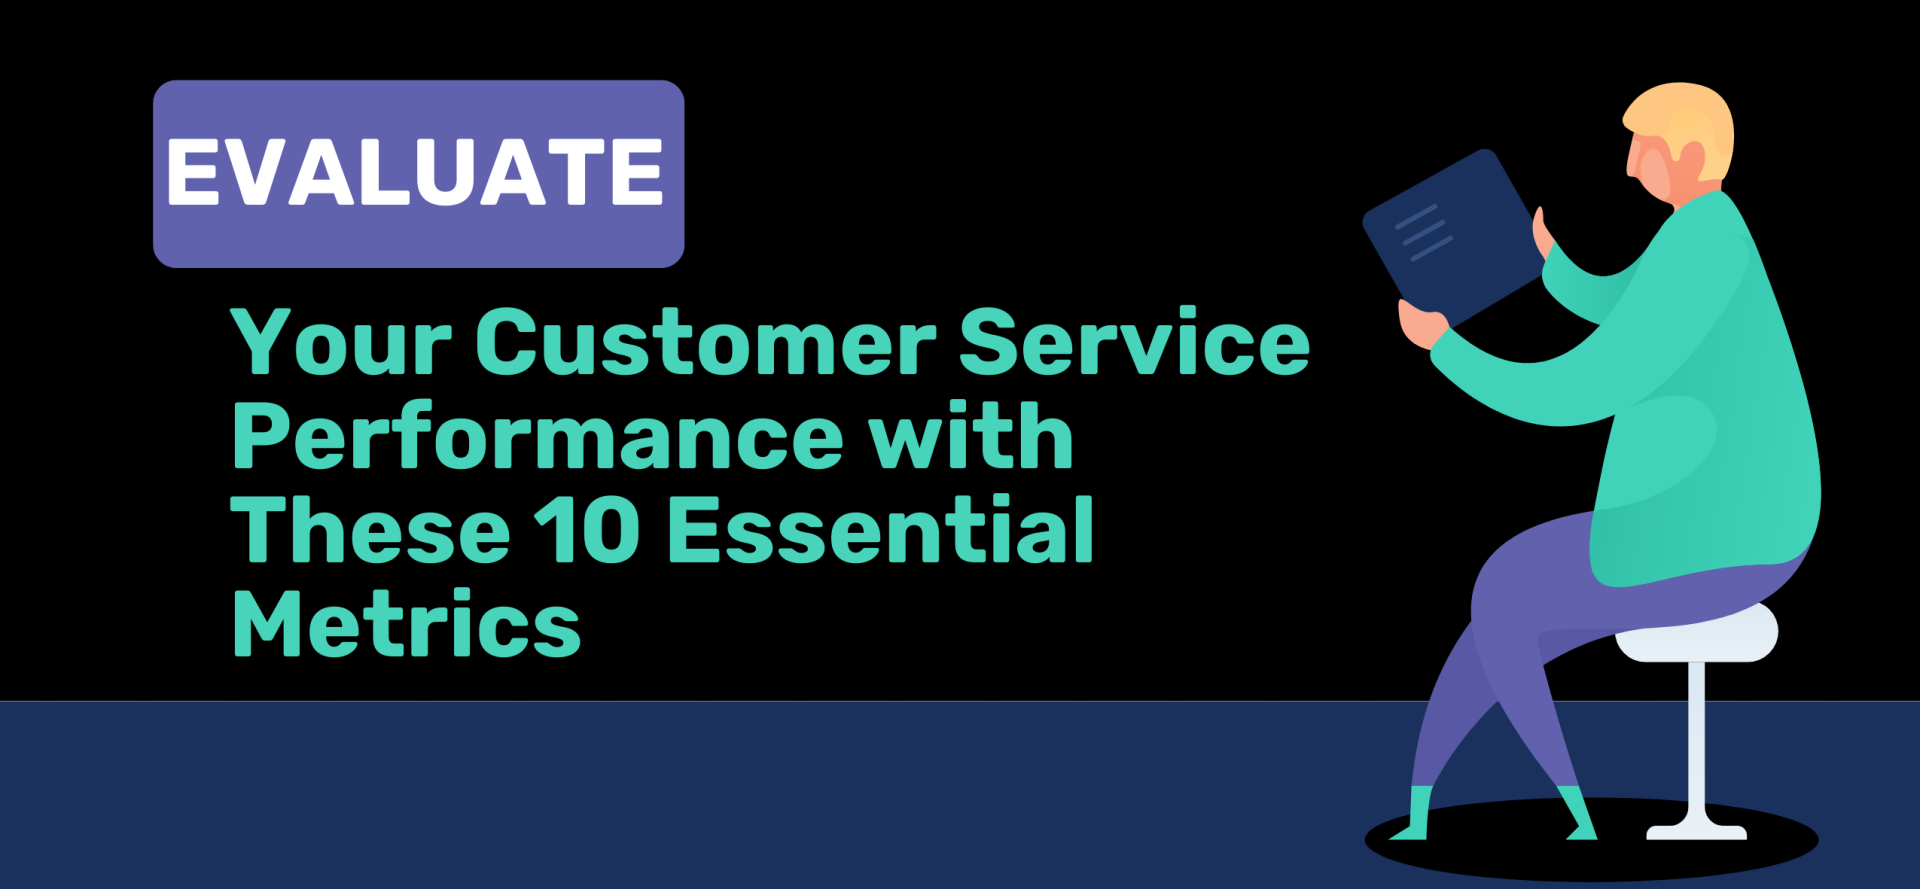 Evaluate Your Customer Service Performance with These 10 Essential Metrics